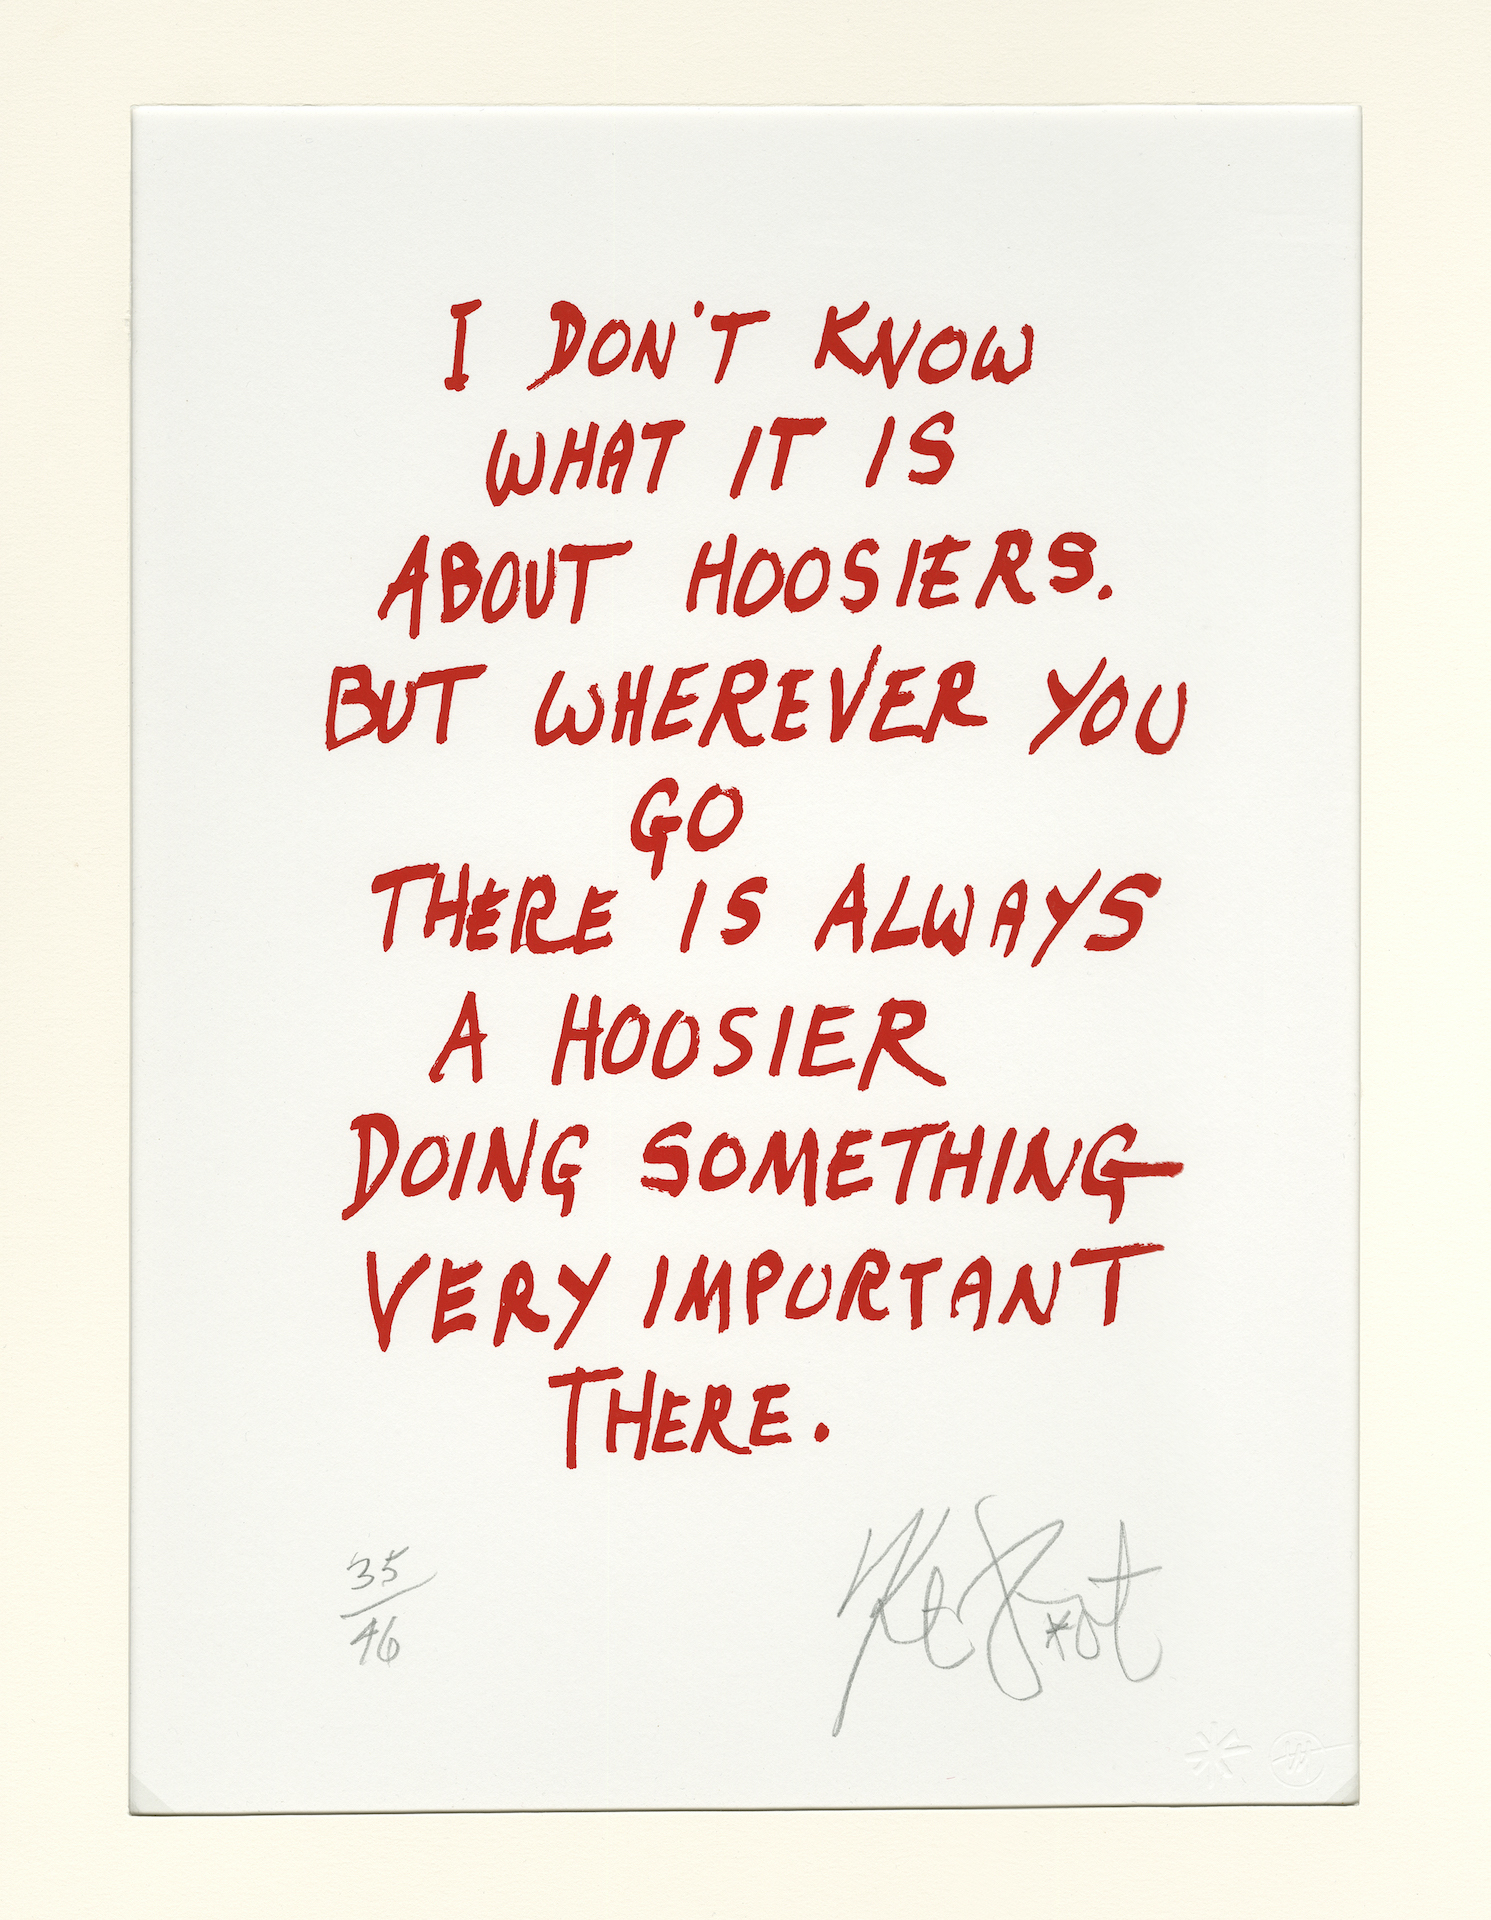 “I Don’t Know What It Is About Hoosiers” 